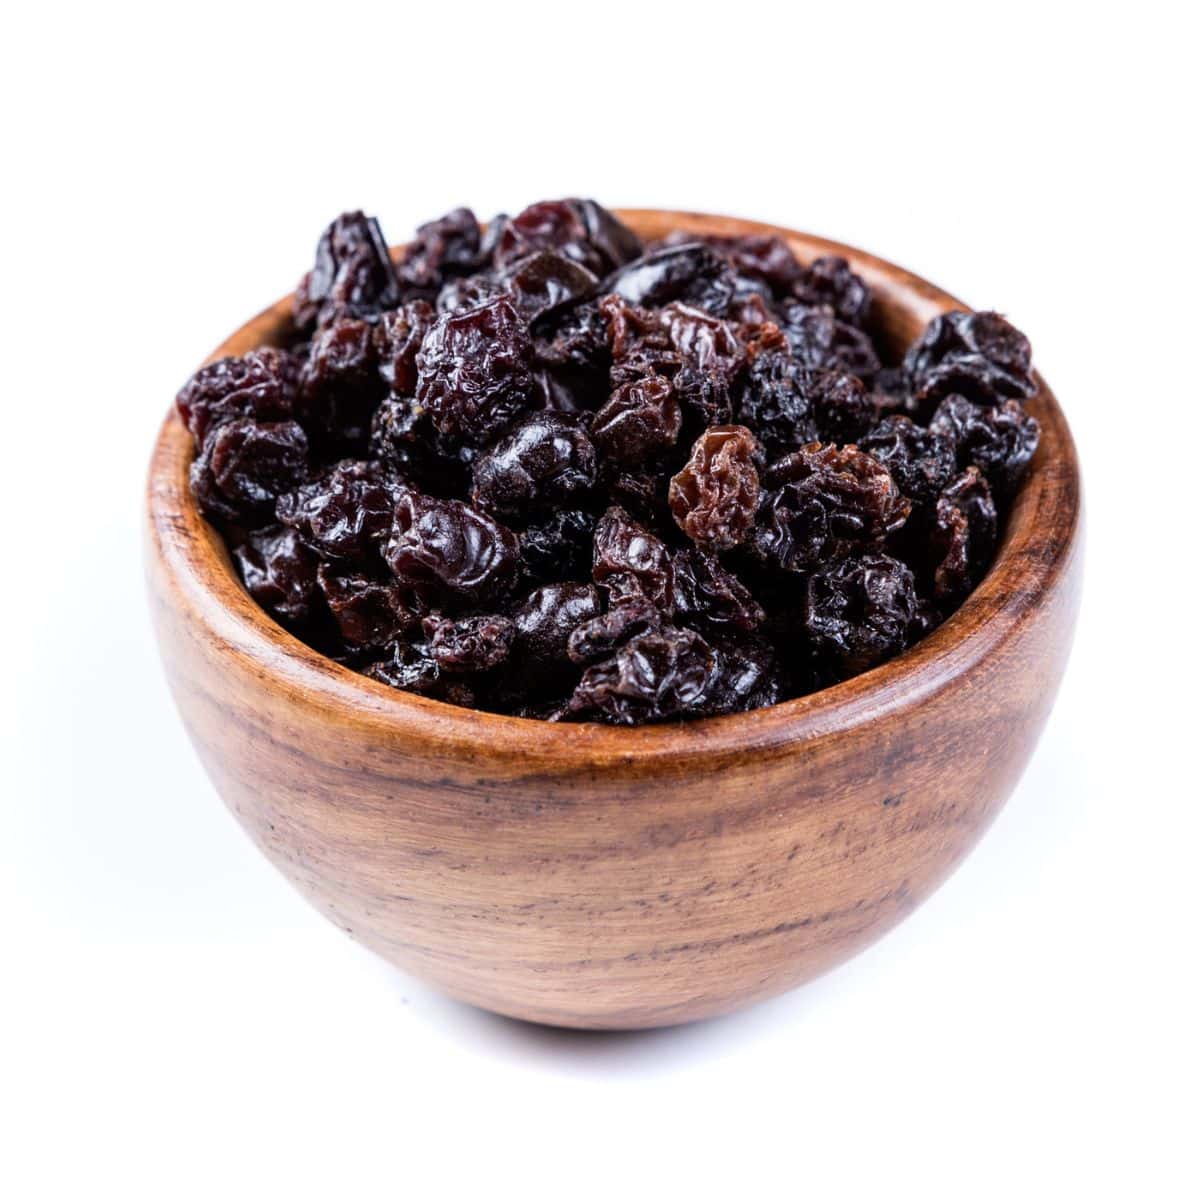 Zante currants in a wood bowl on a white background.